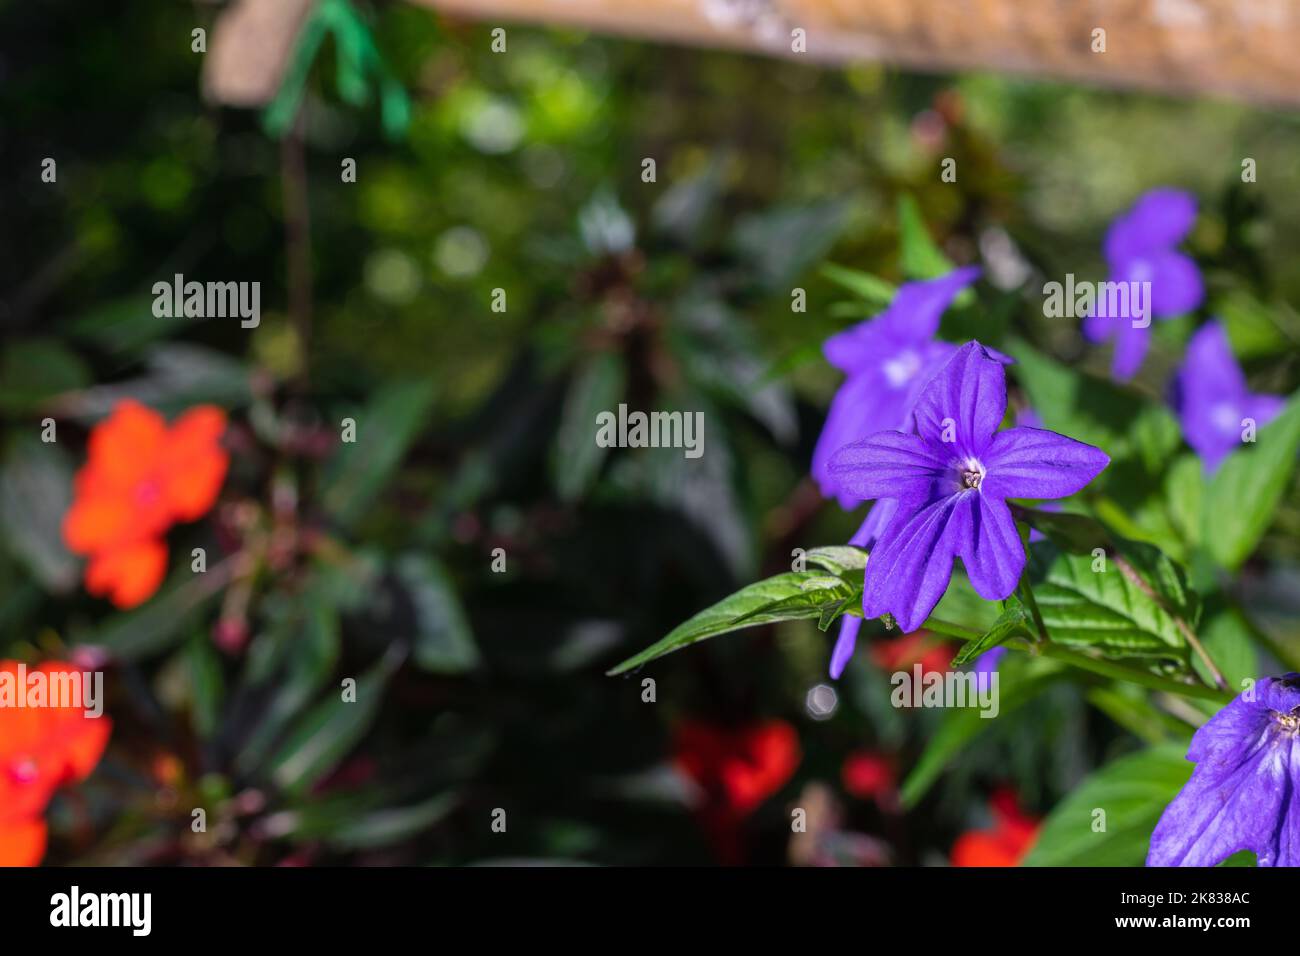 close-up of a peasant flower garden, Browallia speciosa or purple flower with white center. A phanerogamous plant belonging to the Solanaceae family. Stock Photo